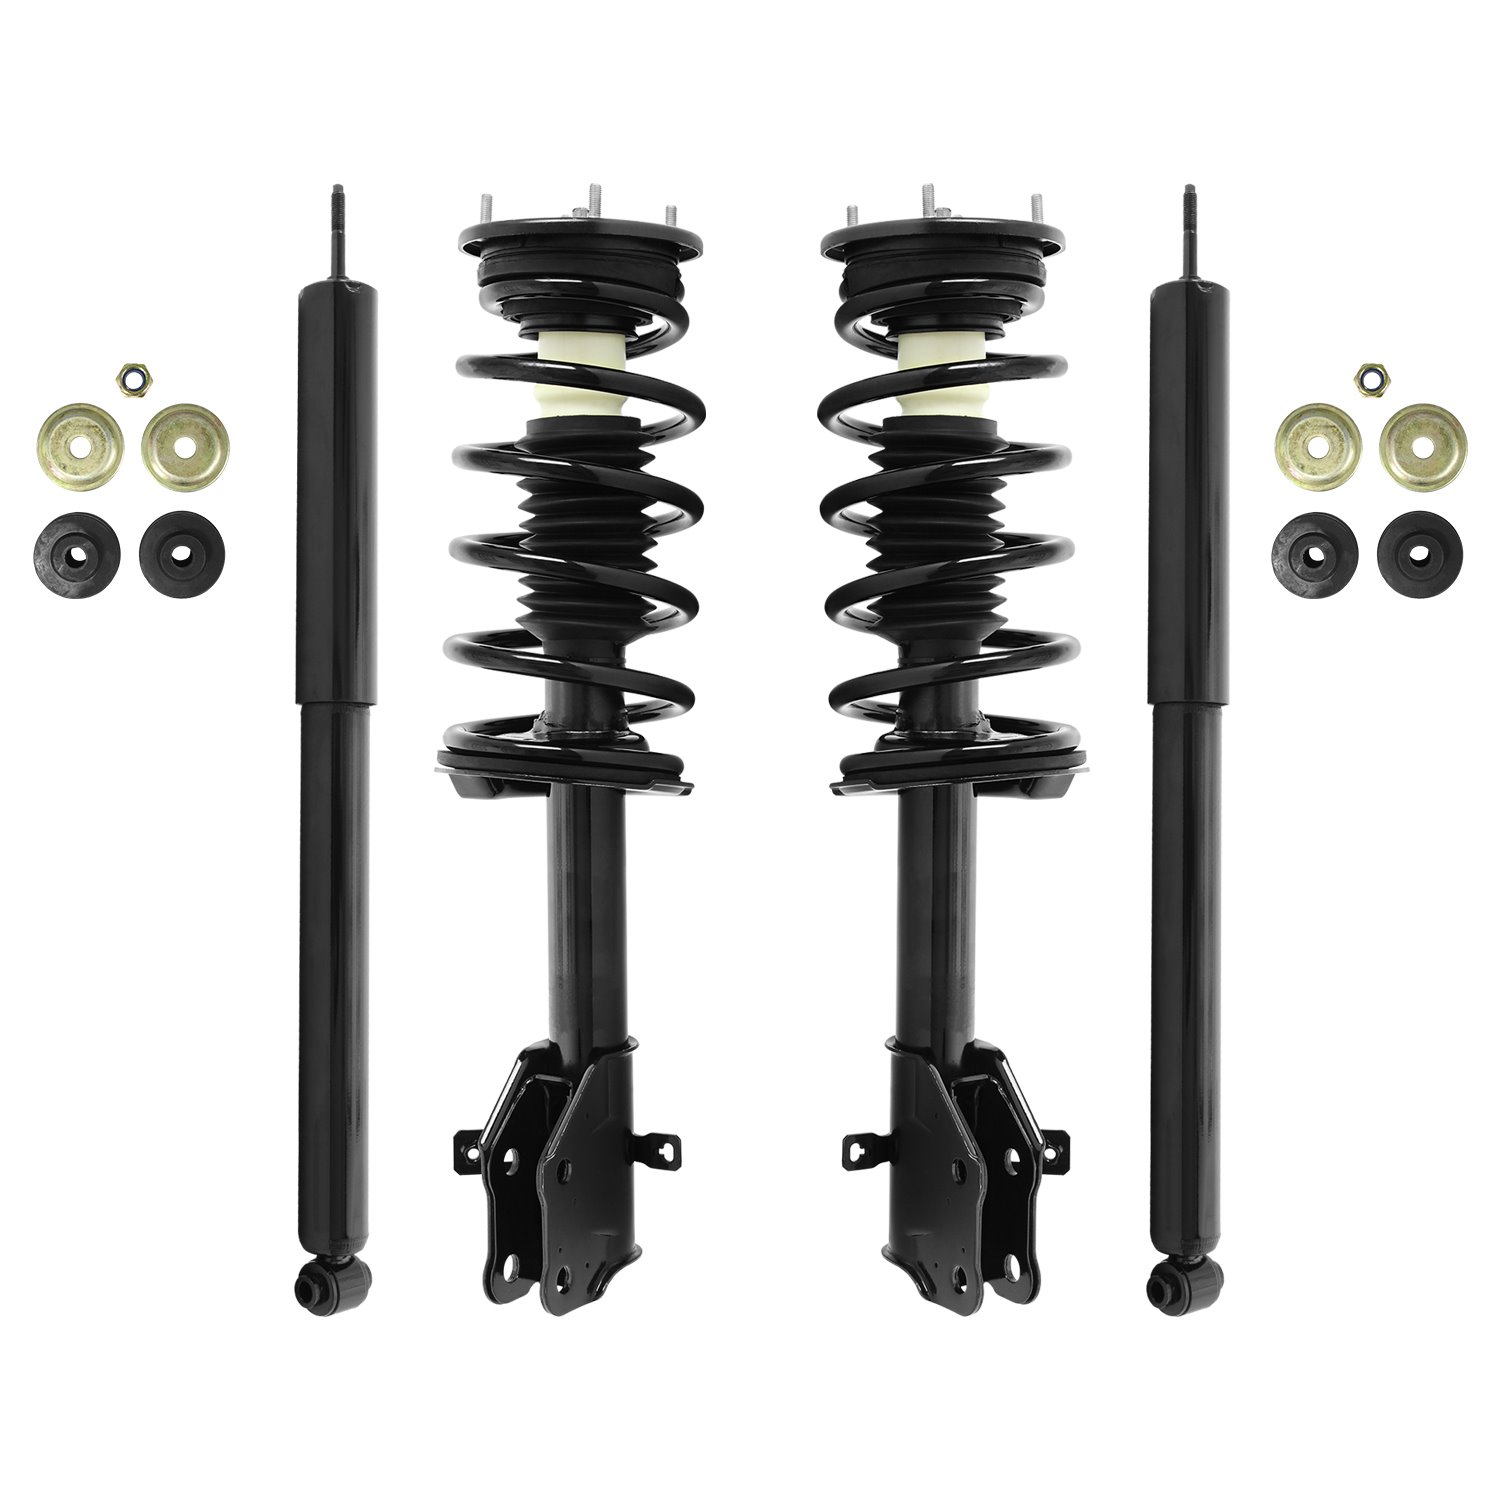 4-11995-252310-001 Front & Rear Suspension Strut & Coil Spring Assembly Fits Select Ford Edge, Lincoln MKX